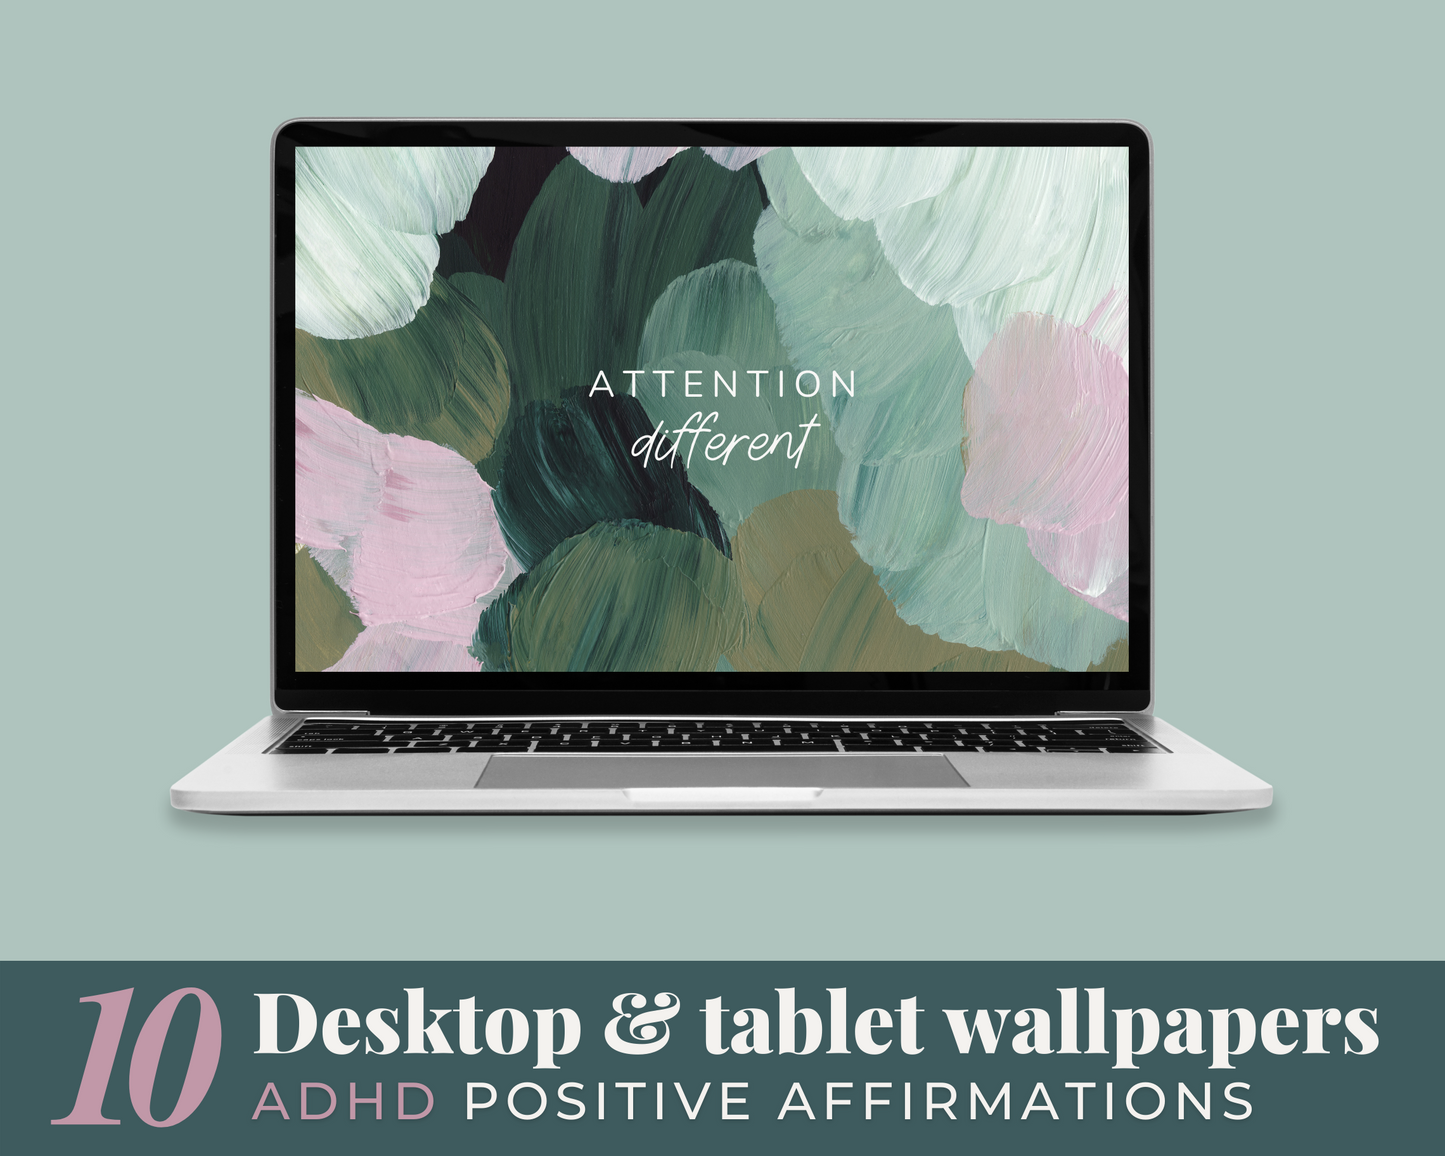 ADHD Wallpapers (by an ADHDer) for Desktop, Tablet or iPad